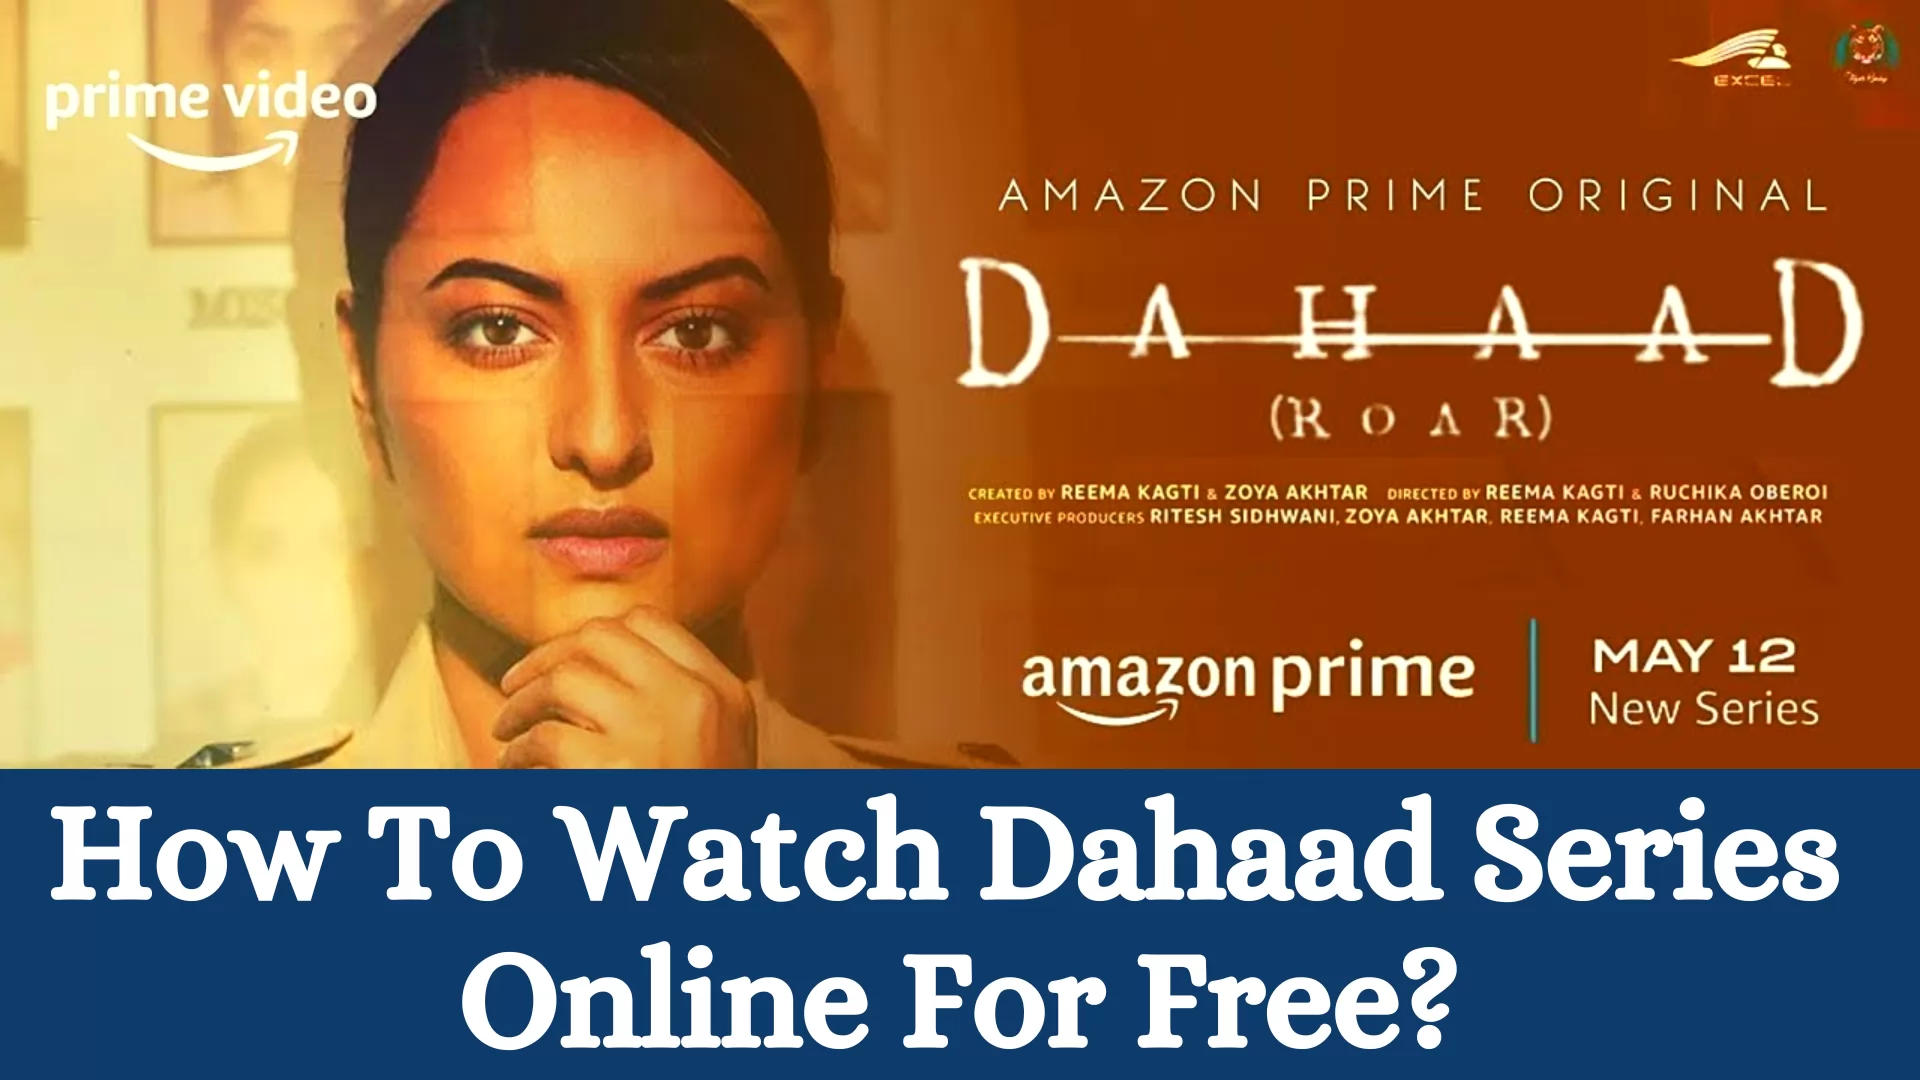 How To Watch Dahaad Series Online For Free?